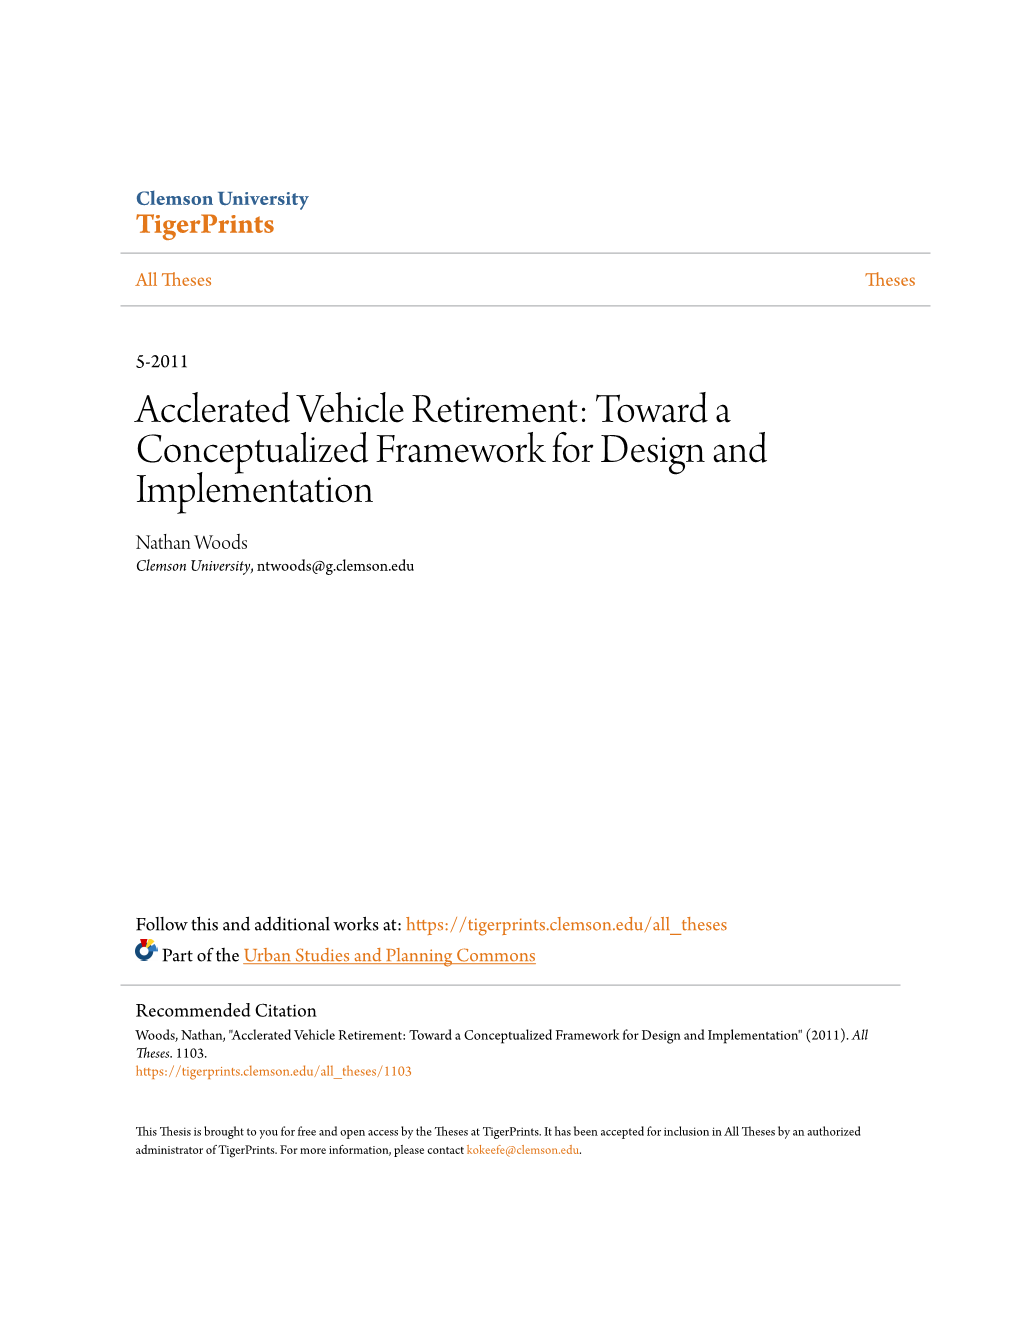 Acclerated Vehicle Retirement: Toward a Conceptualized Framework for Design and Implementation Nathan Woods Clemson University, Ntwoods@G.Clemson.Edu